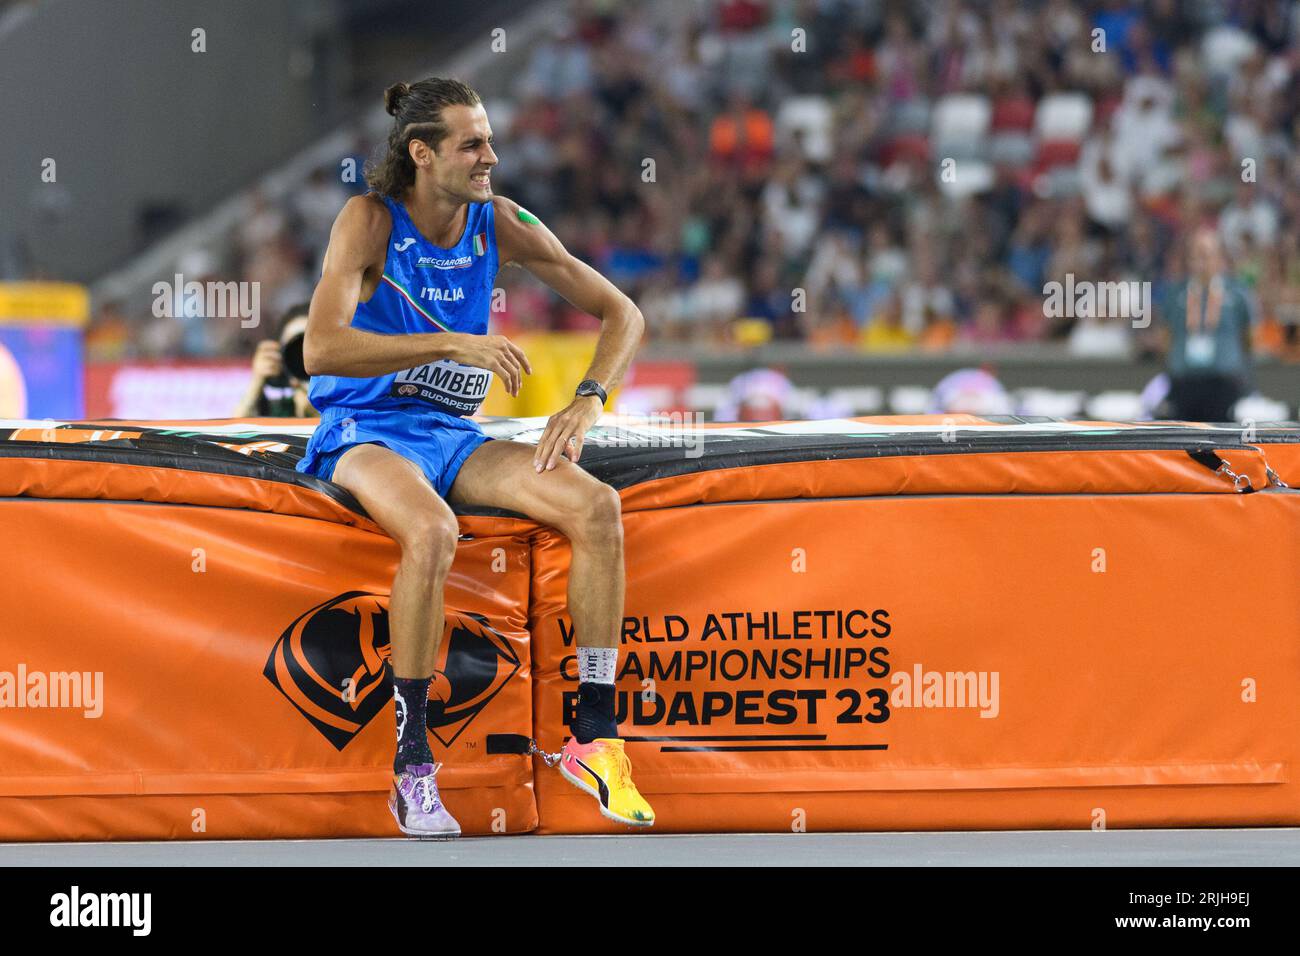 Gianmarco Tamberti (Italy) during the high jump final during the world athletics championships 2023 at the National Athletics Centre, in Budapest, Hungary